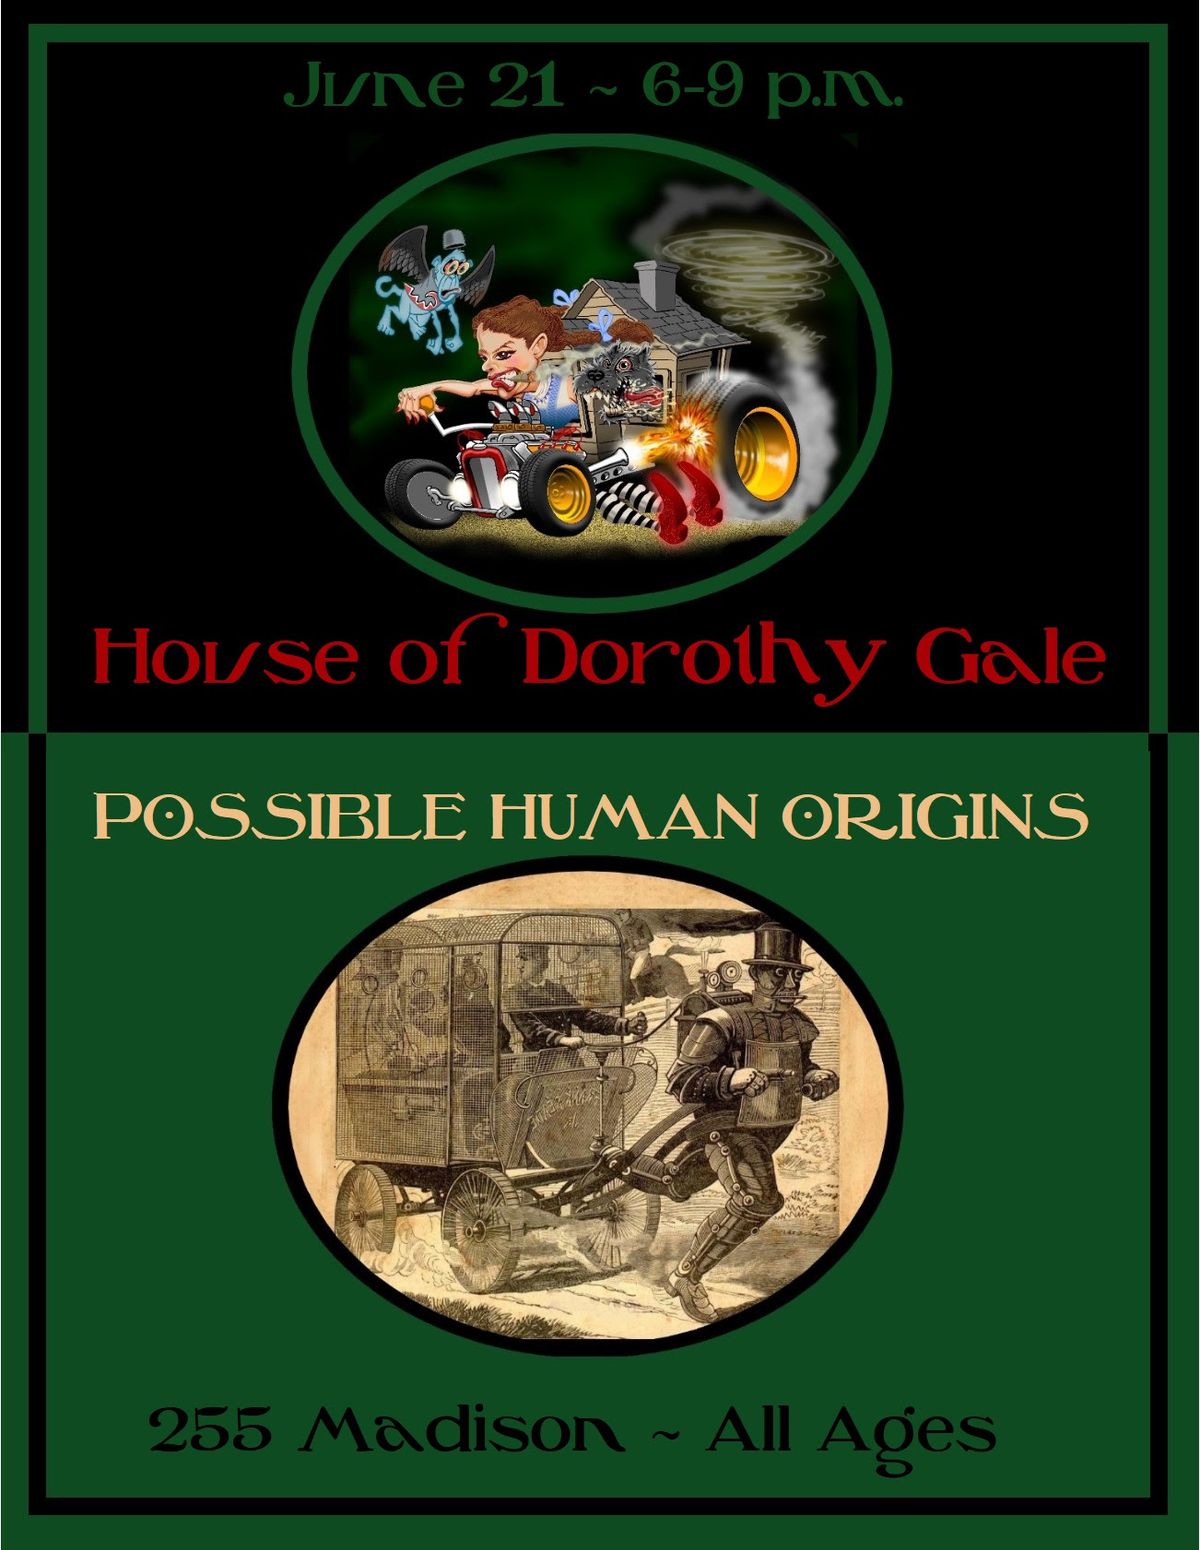 Live music! House of Dorothy Gale and Possible Human Origins